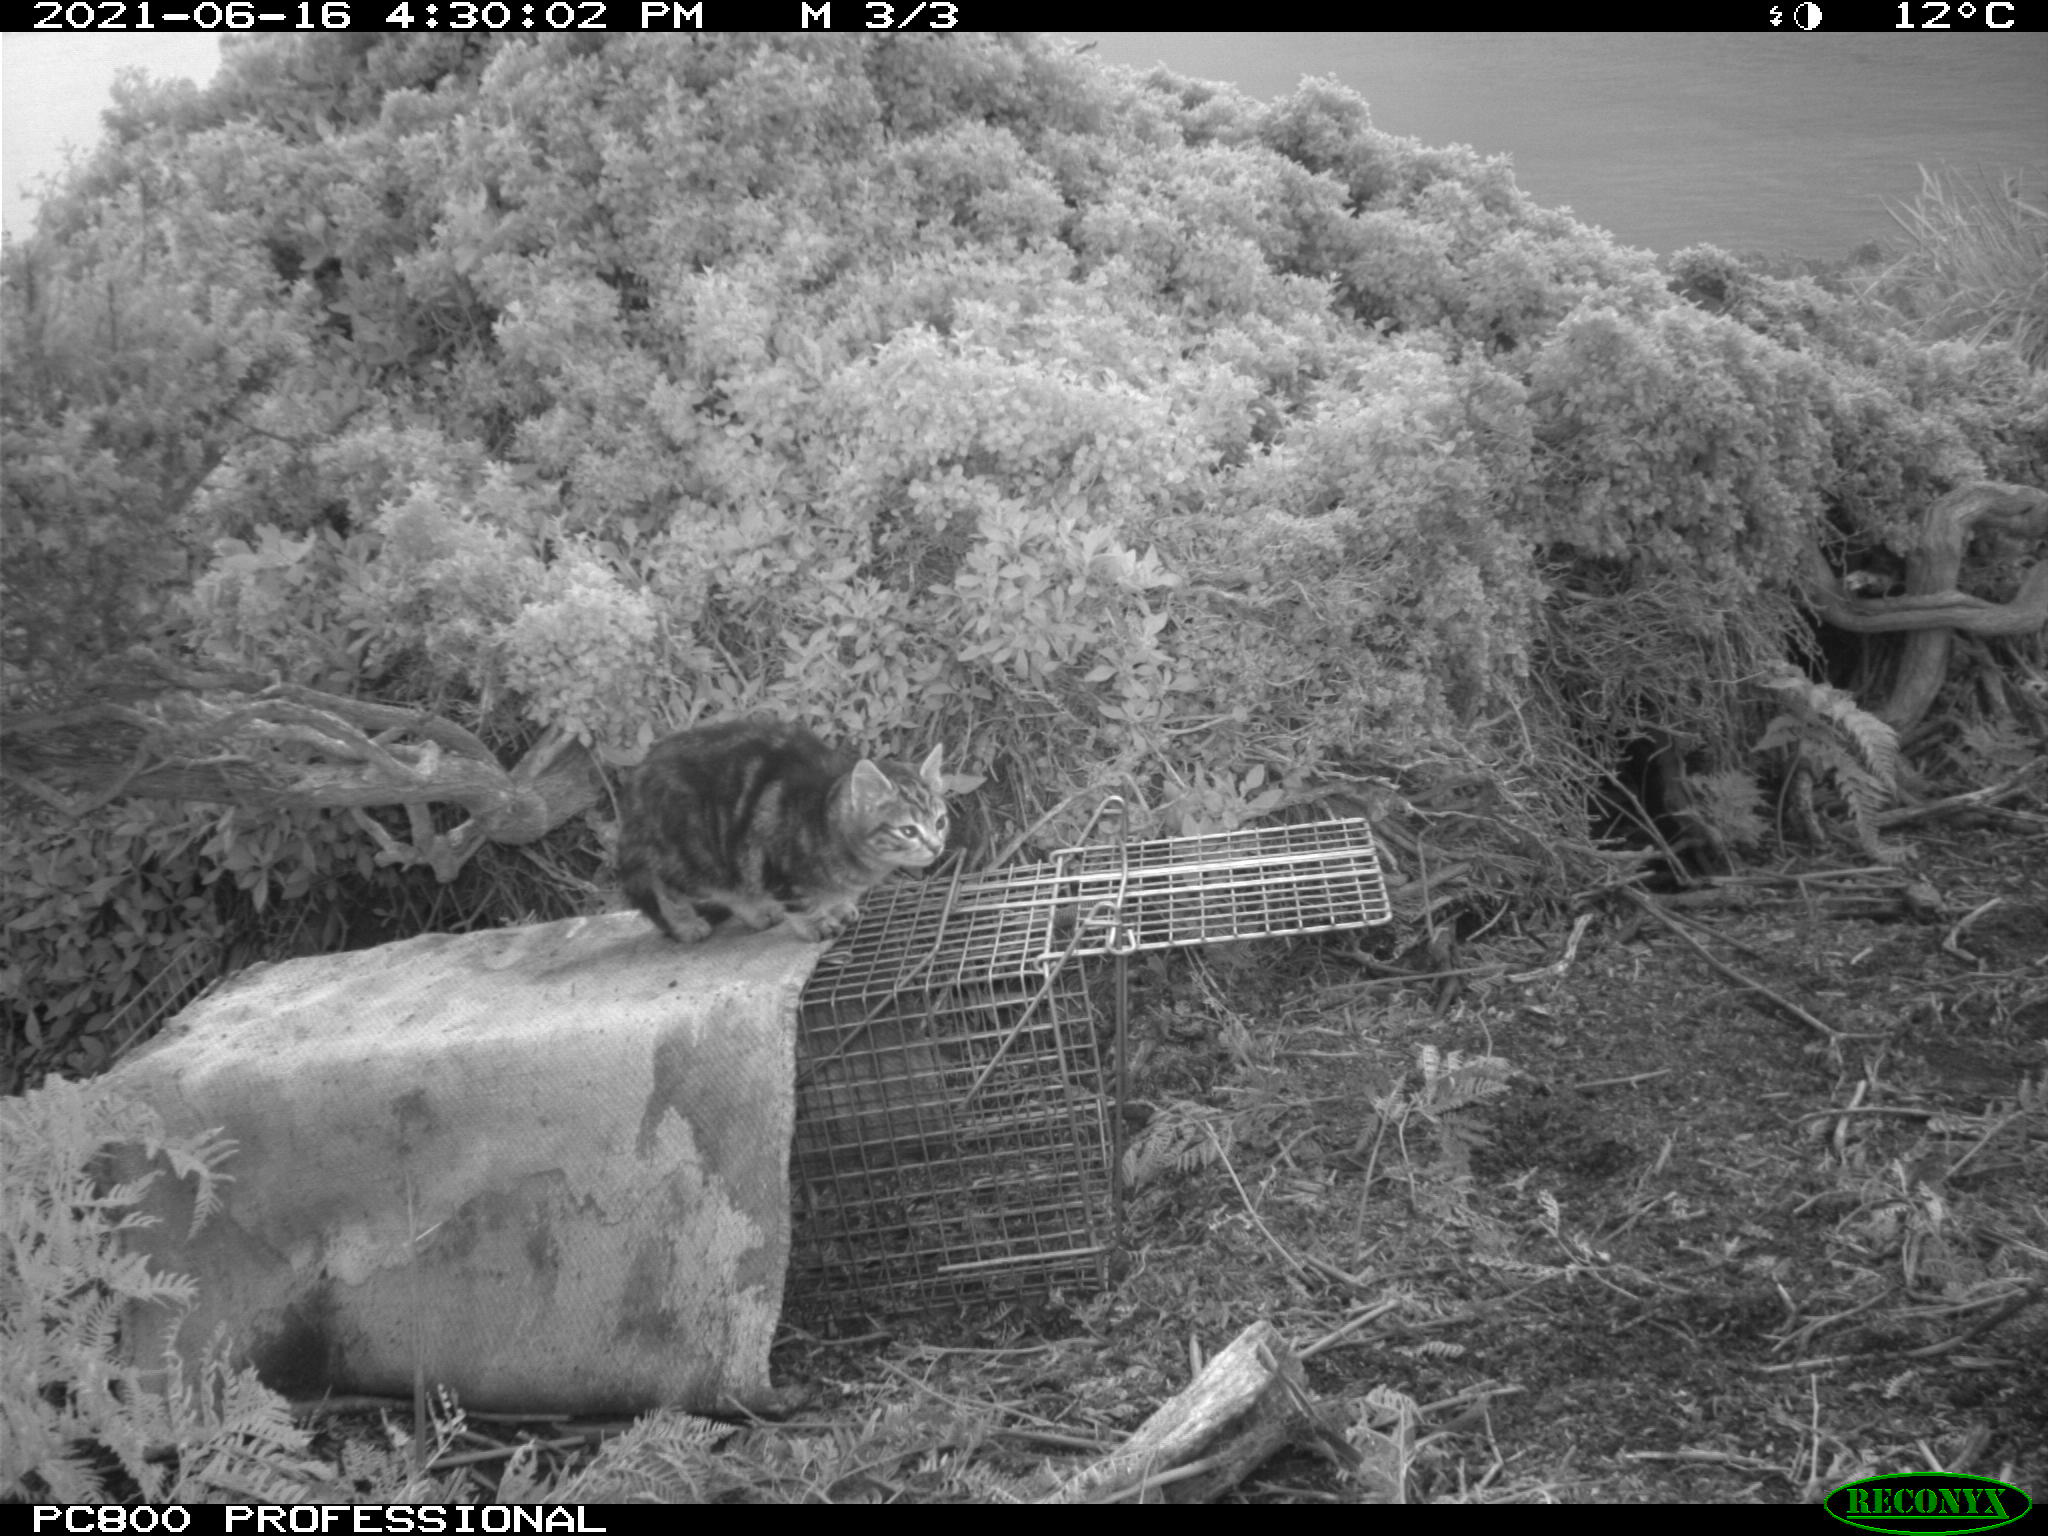 Camera trap image of a feral kitten on top of a cat trap